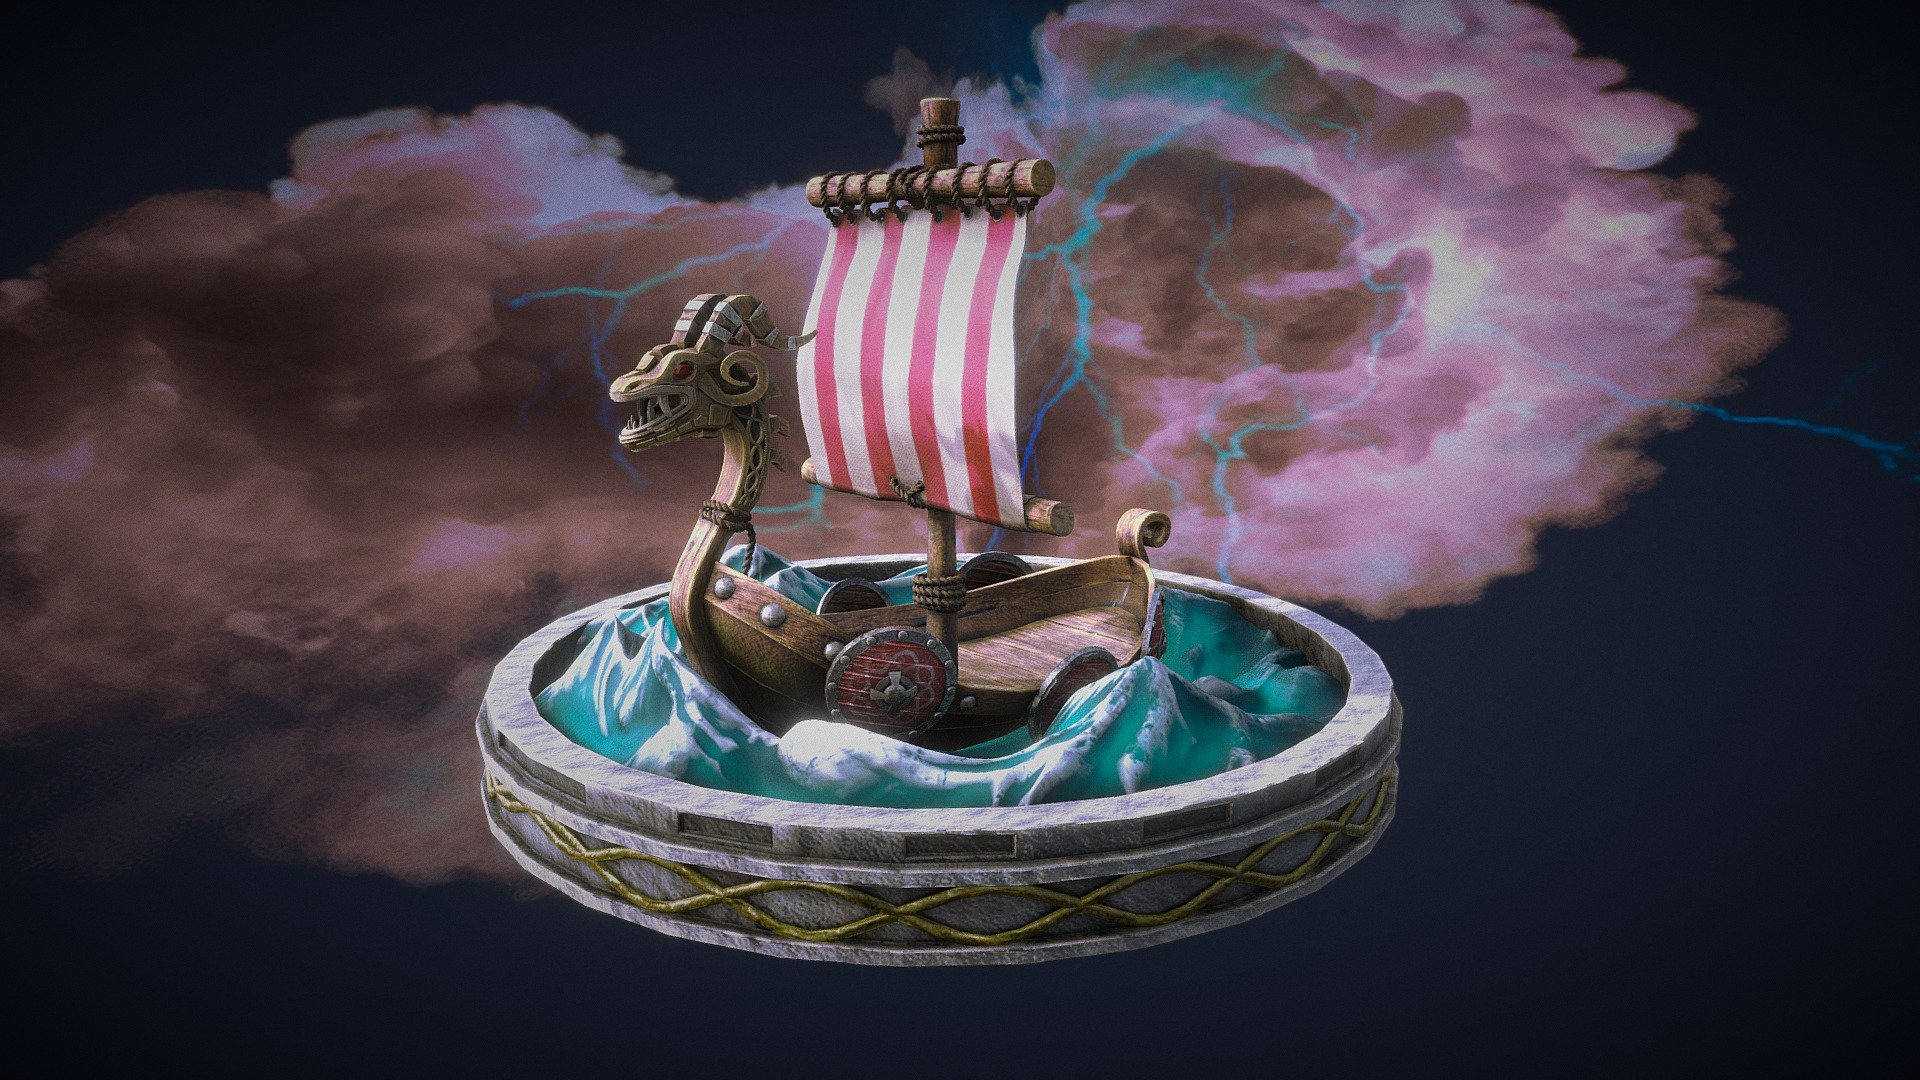 Stylized Viking Boat 3D Model &amp; Complete Guide



Youtube complete Guide to this Model Link: https://youtu.be/sWyUU27zosw

This is a complete guide on how we created this stylized viking asset.  We used a mix of Blender, Zbrush, and Topogun for the modeling section.  The model was then textured in Substance painter and finally rendered in Blender 3 with the help of the compositor.

This is the Blend.file That contains everything we created in our YouTube video.  This is a packed Blend file and has been cleaned up.  This makes sure there are no unnecessary files, materials, etc.  Everything in the Blend.file is also organized into collections and named correctly.  

The Blender file contains:  

Full camera and lighting setup including HDRI

Full compositor setup

Rope Geometry Node &amp; Setup

Pack Blend fille with all Textures

Texture Pack for both Blender &amp; Unreal Engine - Stylized Viking Boat 3D Model & Complete Guide - Buy Royalty Free 3D model by 3D Tudor (@3DTudor) 3d model